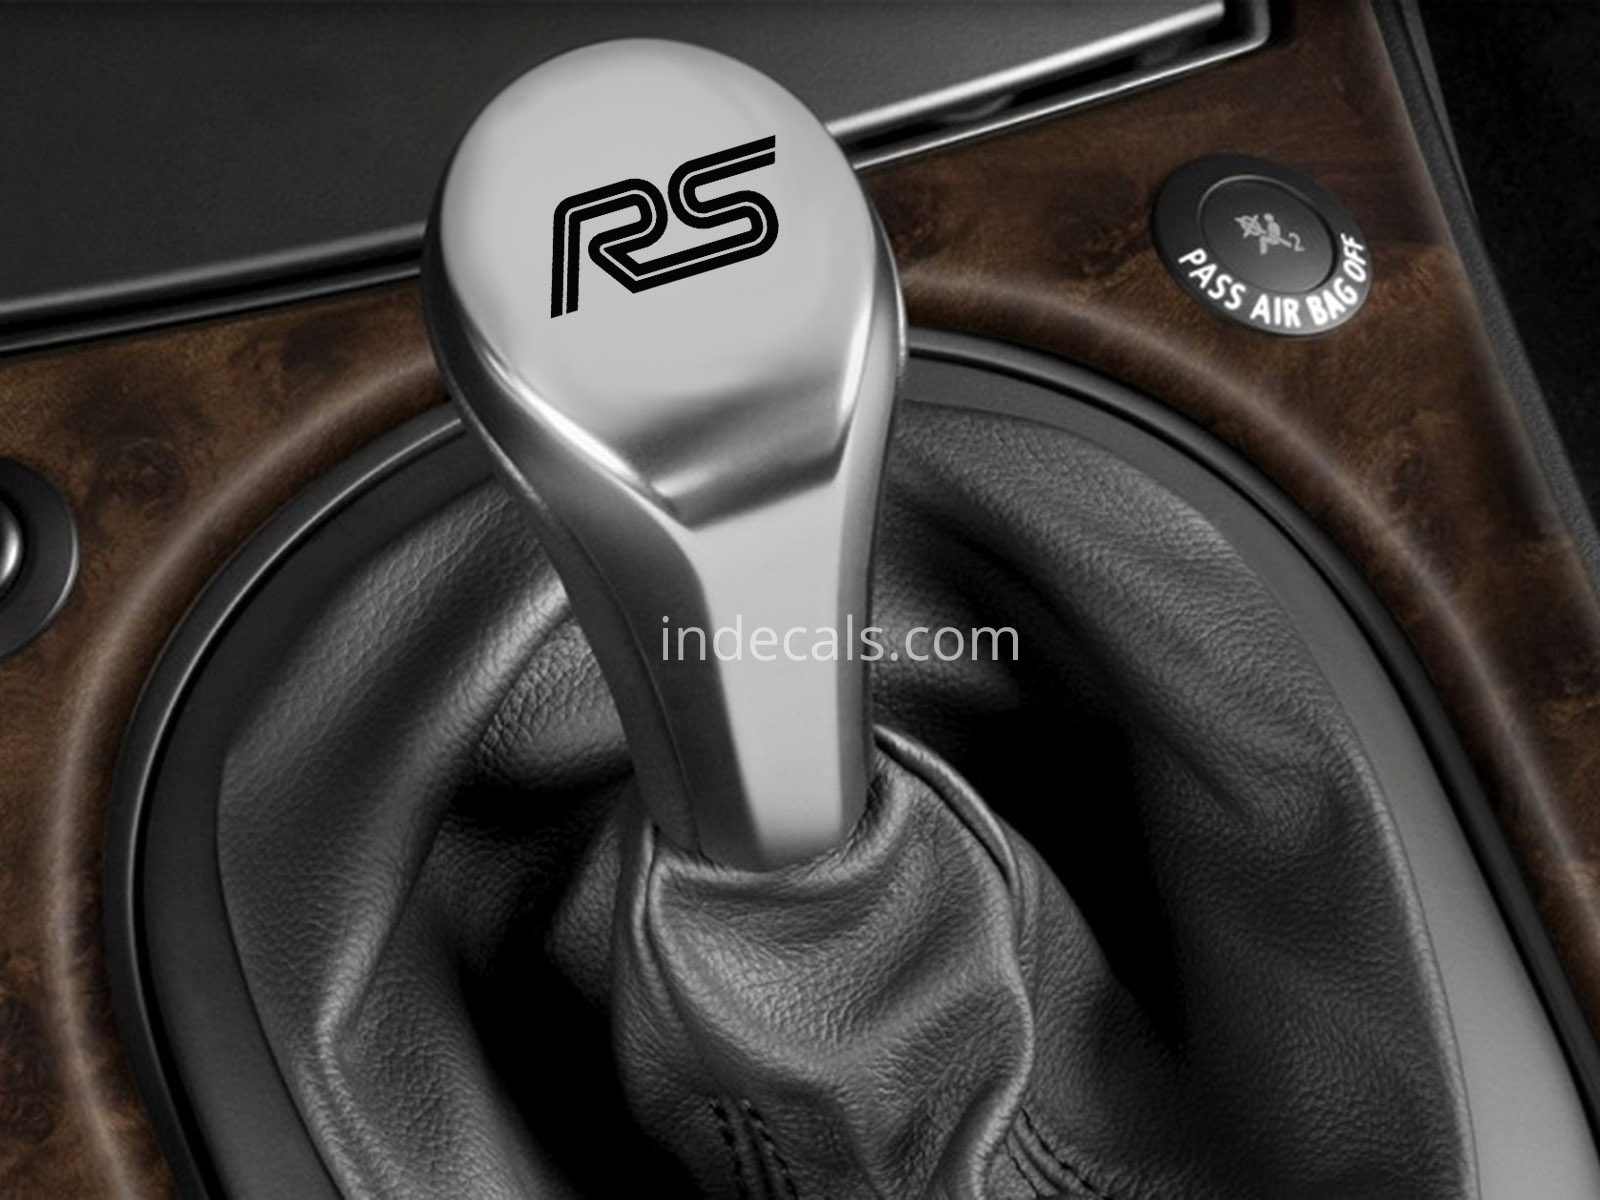 3 x Ford RS Stickers for Gear Knob - Black